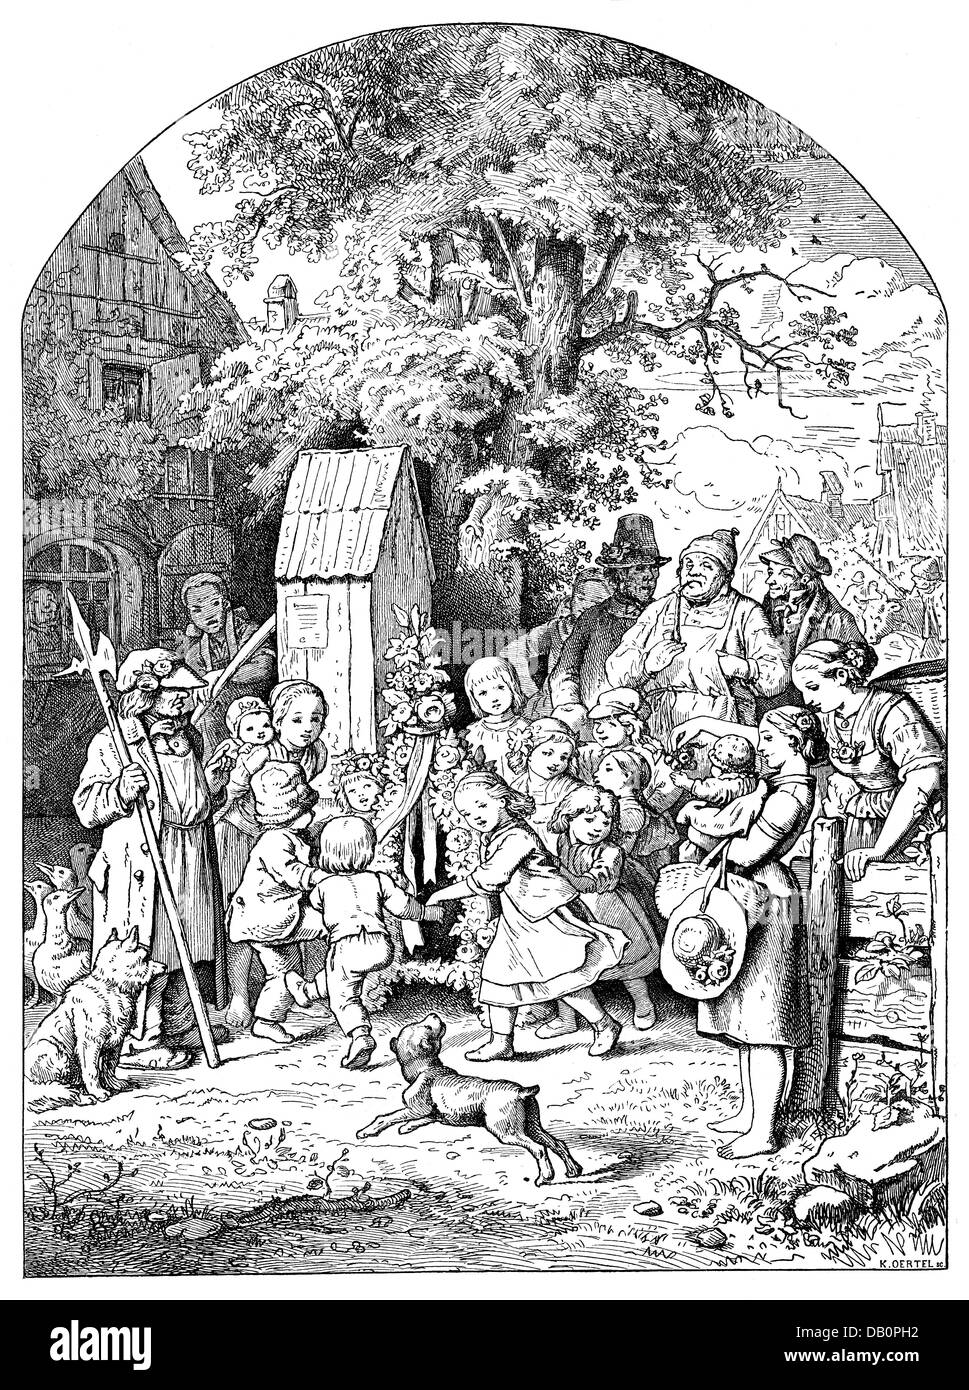 festivities, St John's Eve, children with dog dancing around St John's crown, after Ludwig Richter (1803 - 1884), wood engraving, by K.Oertel, from: 'Neuer Strauss fürs Haus', Alphons Dürr publishing house, Leipzig, 1864, Additional-Rights-Clearences-Not Available Stock Photo